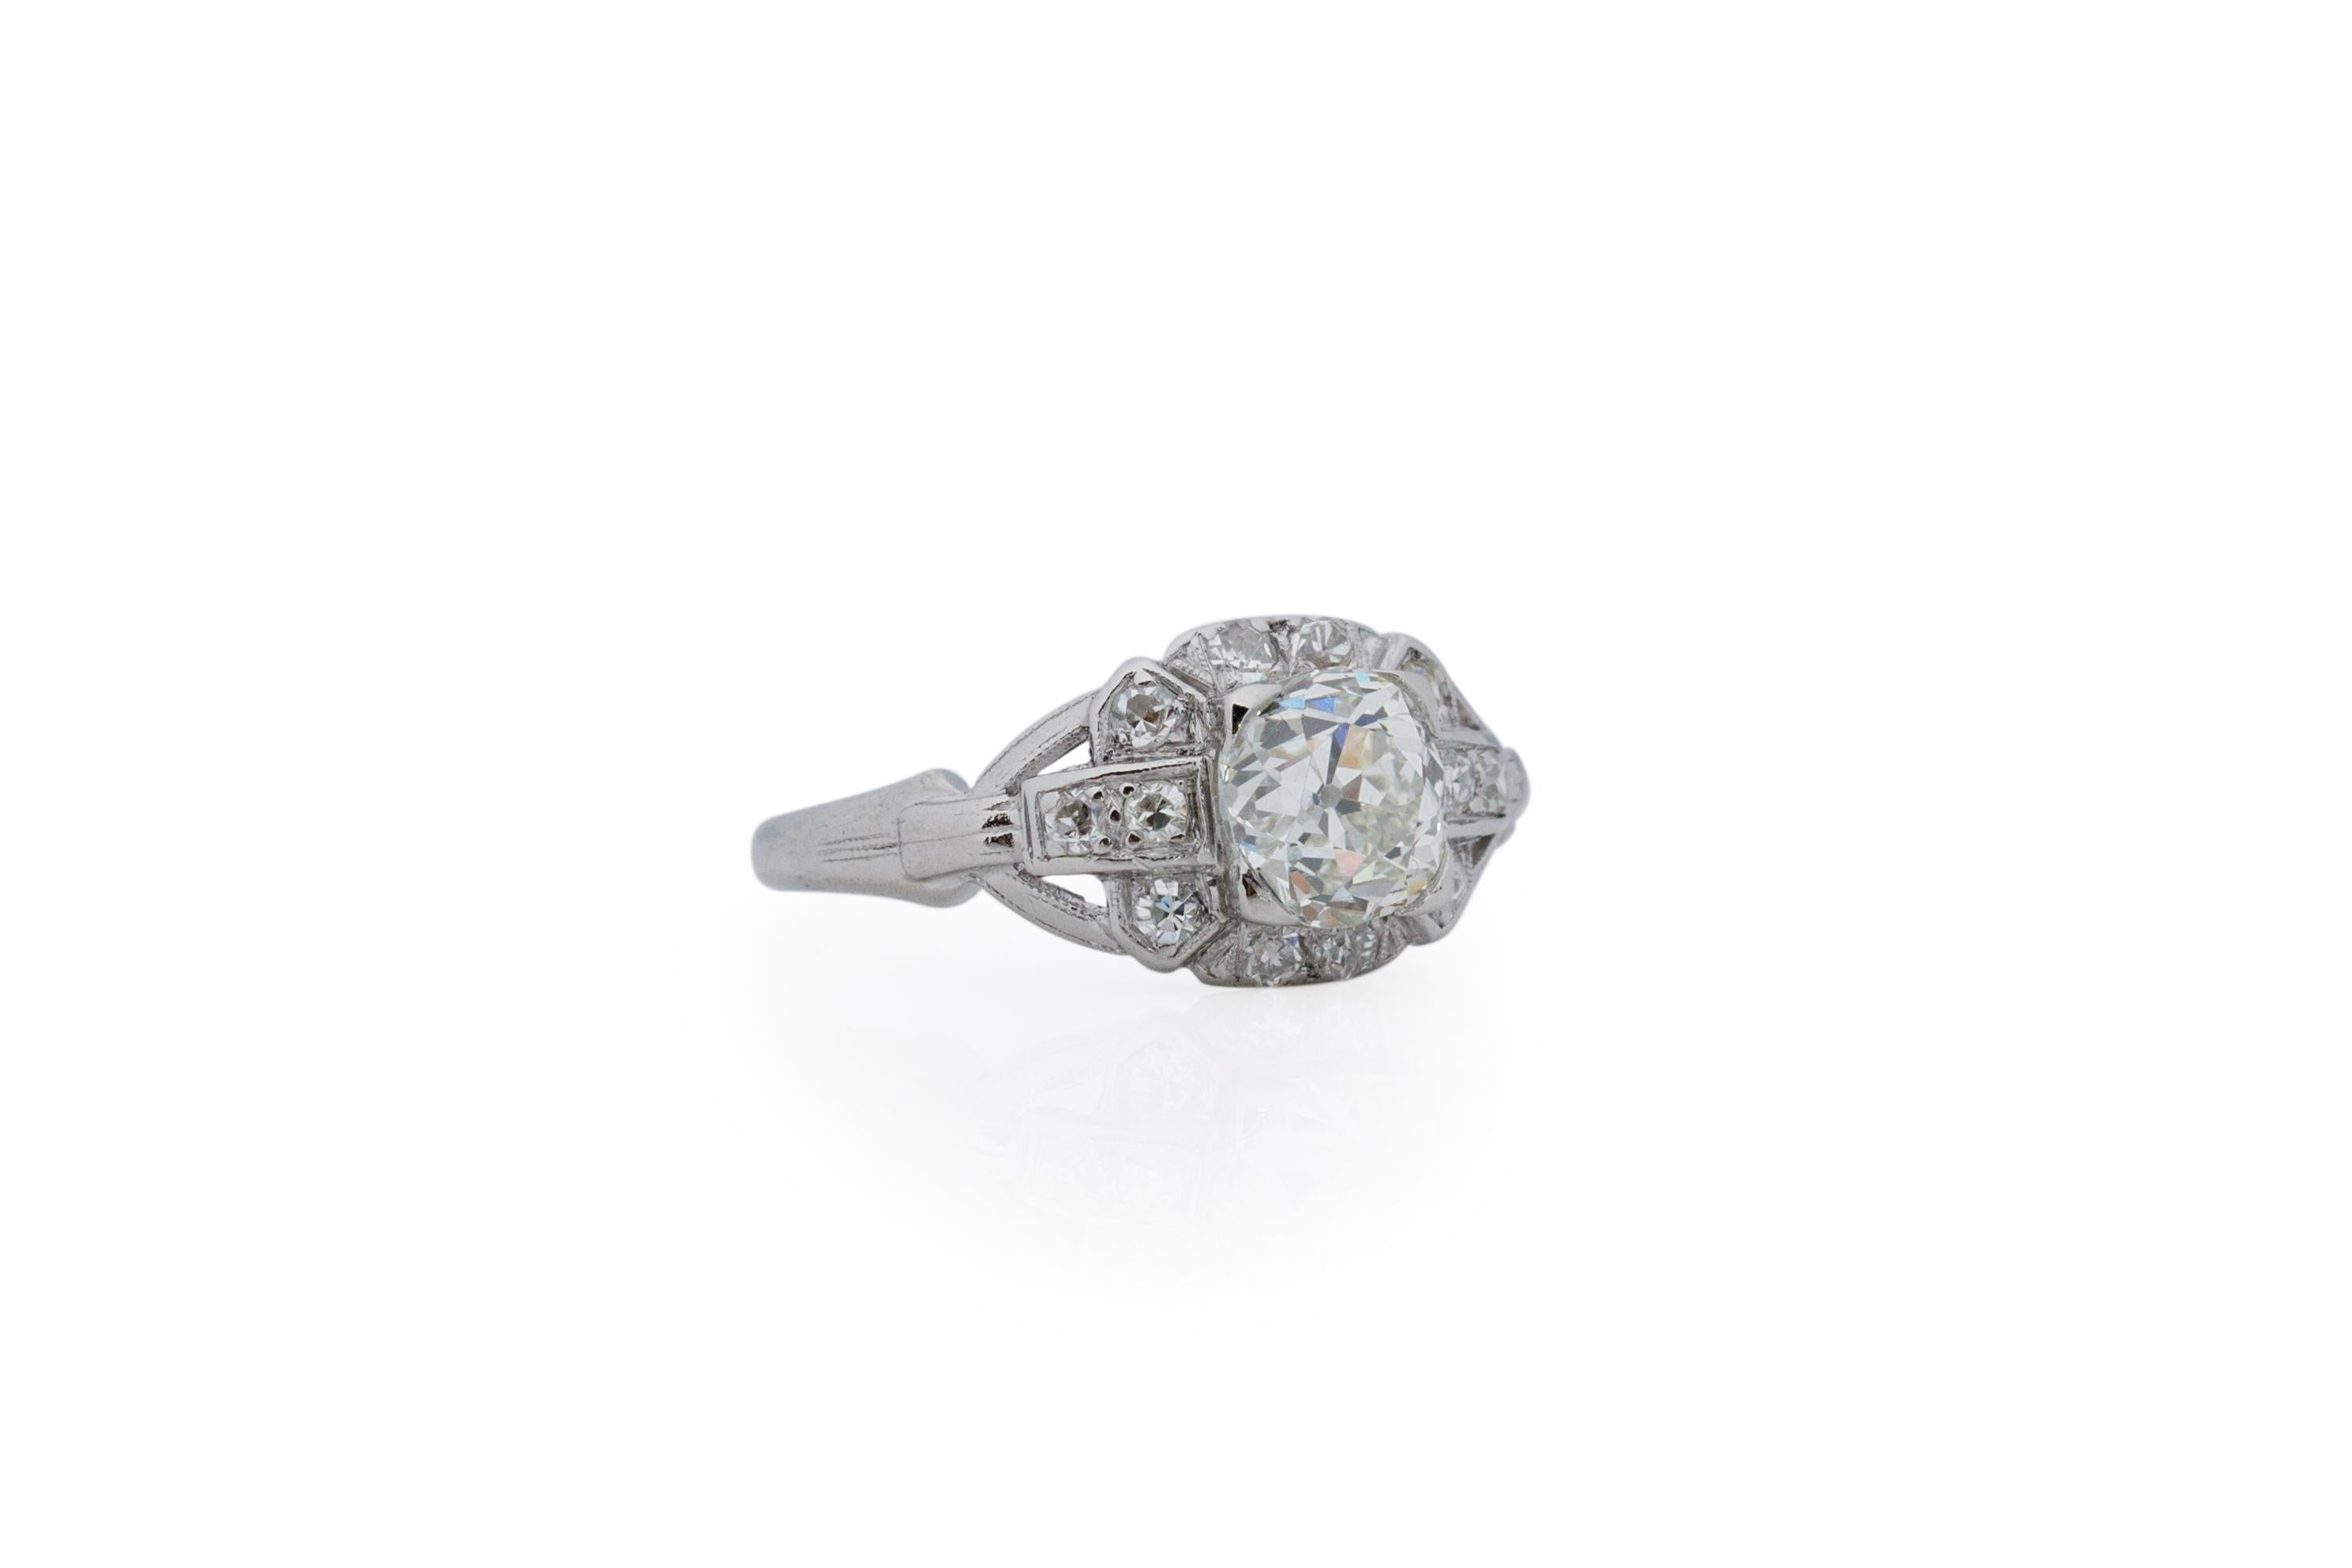 Ring Size: 6
Metal Type: Platinum [Hallmarked, and Tested]
Weight: 3.0 grams

Center Diamond Details:
GIA REPORT #:2213319823
Weight: 1.28 carat
Cut: Antique Cushion
Color: I
Clarity: VS2
Measurements: 6.31mm x 6.15mm x 4.64mm

Side Stone